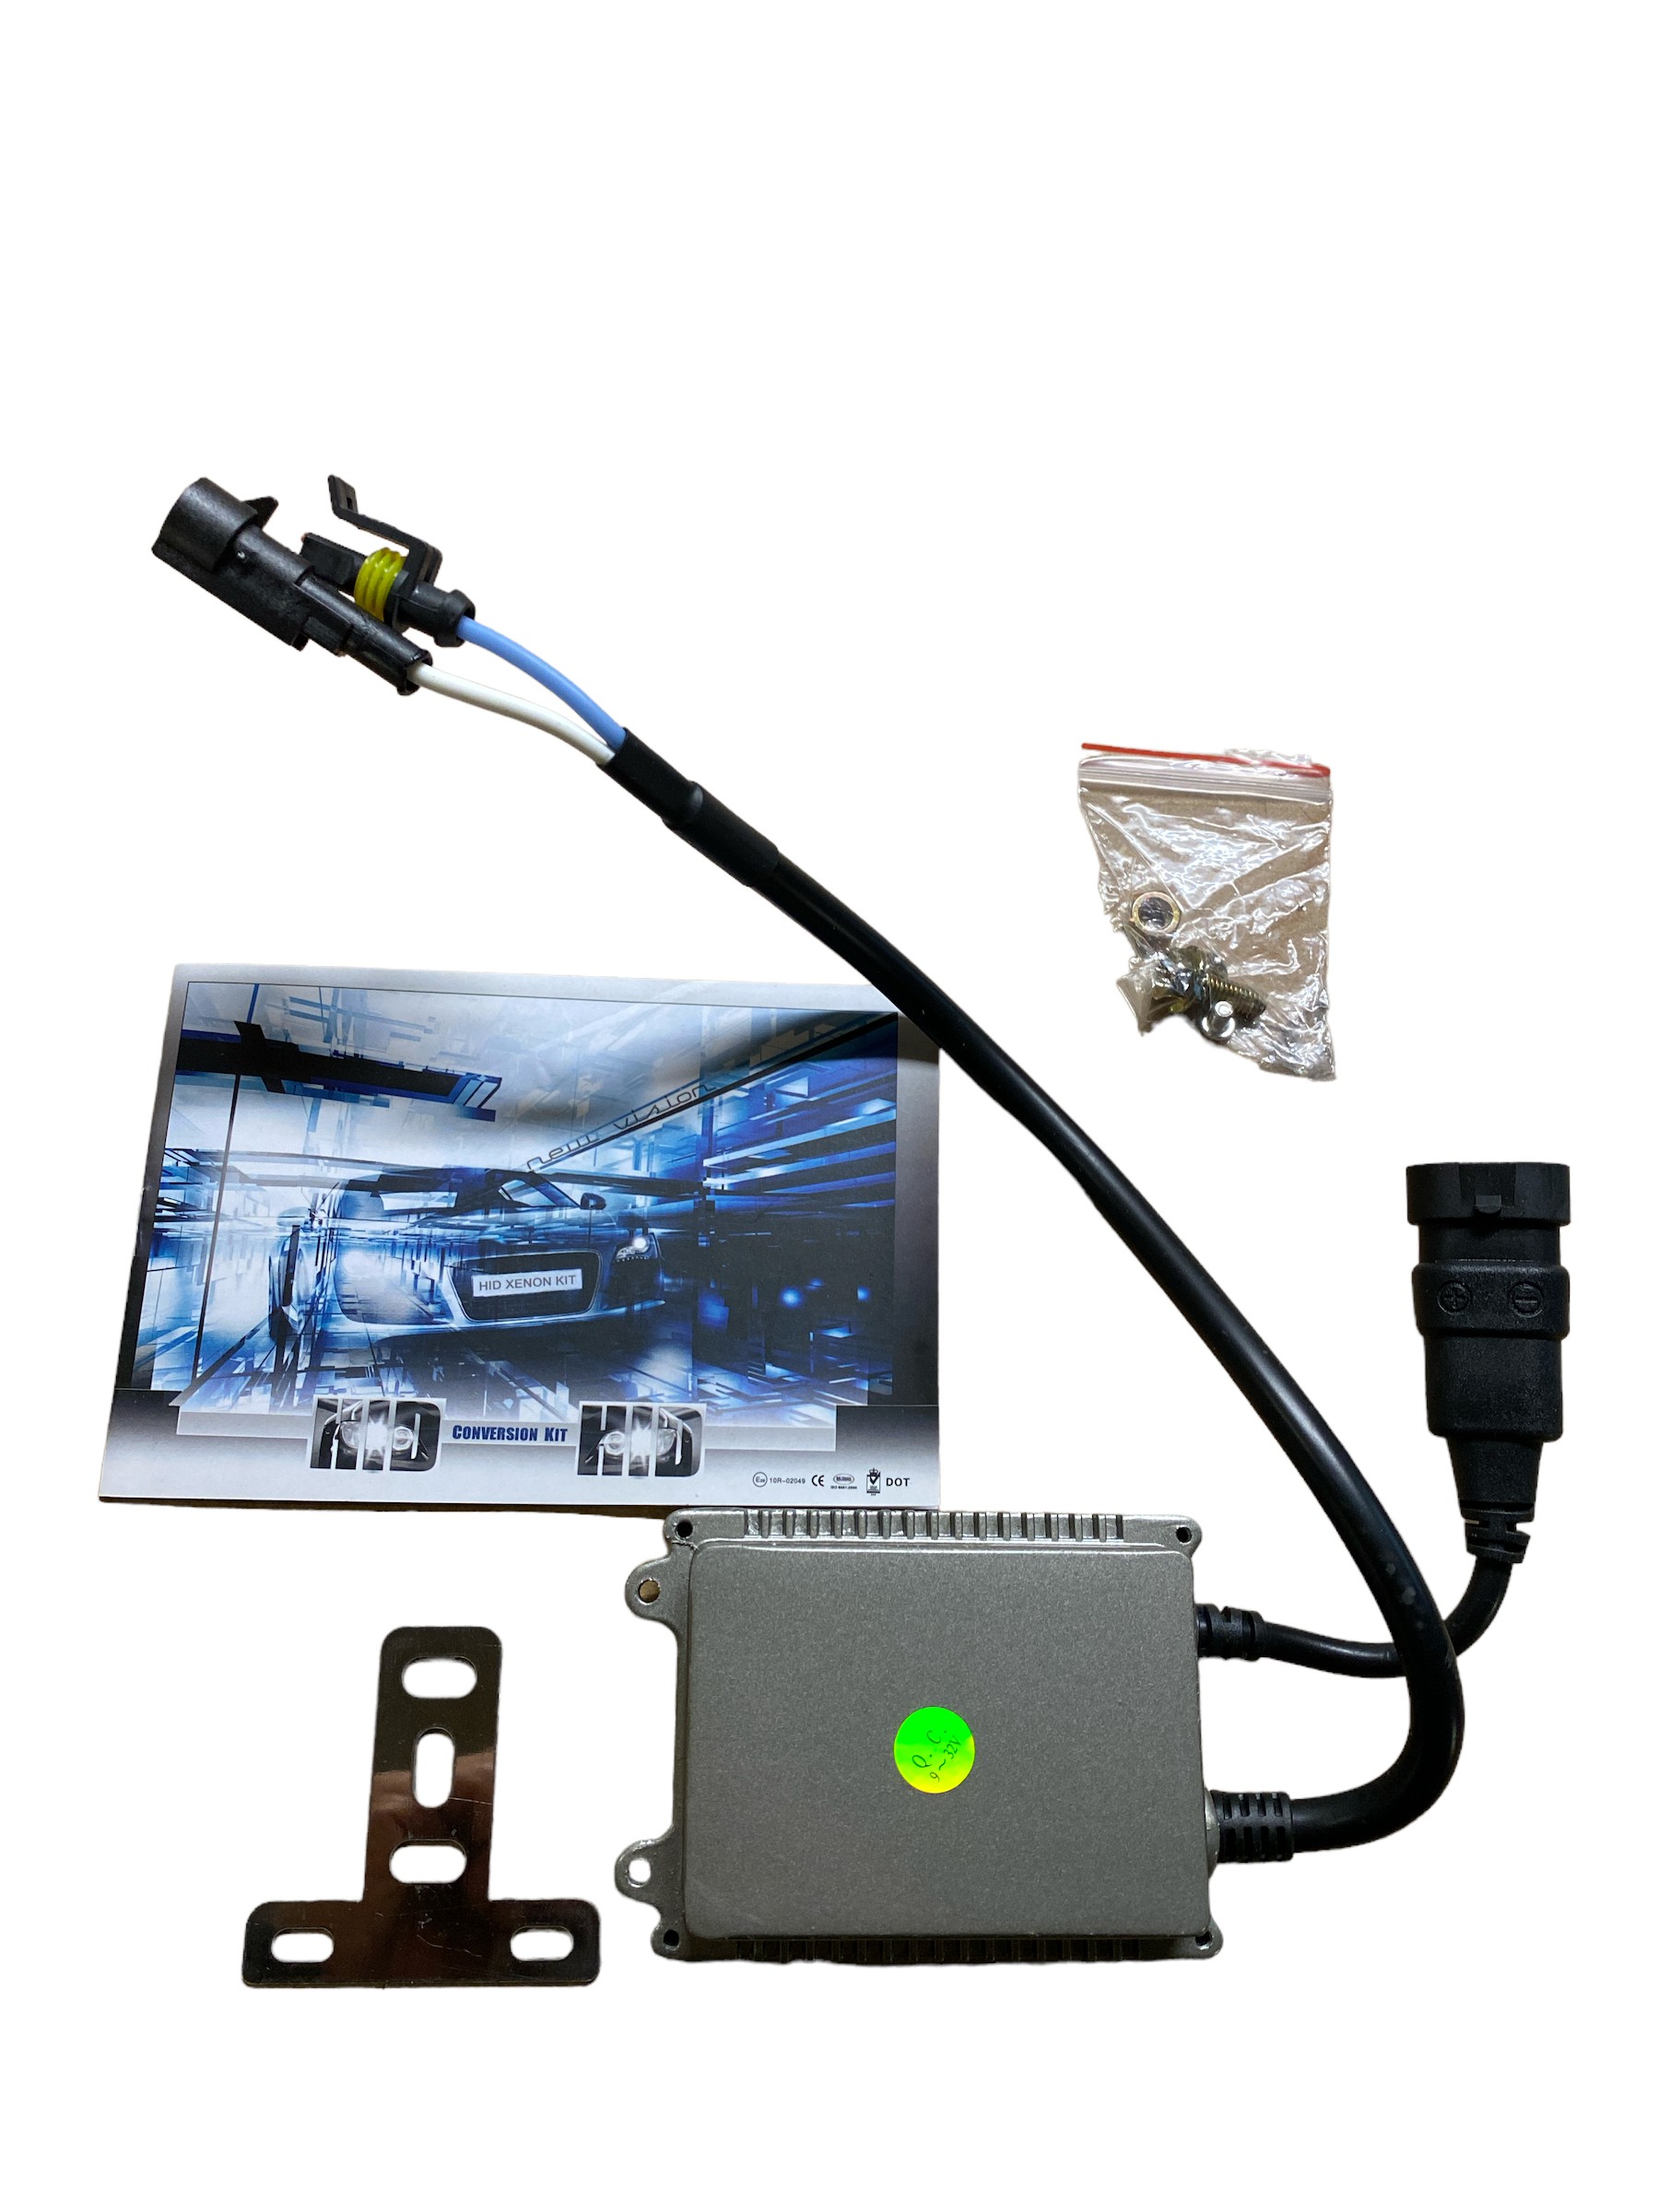 https://hidxenonverlichting.nl/media/product/7ed/hid-xenon-kit-h7-pro-can-bus-acb.png